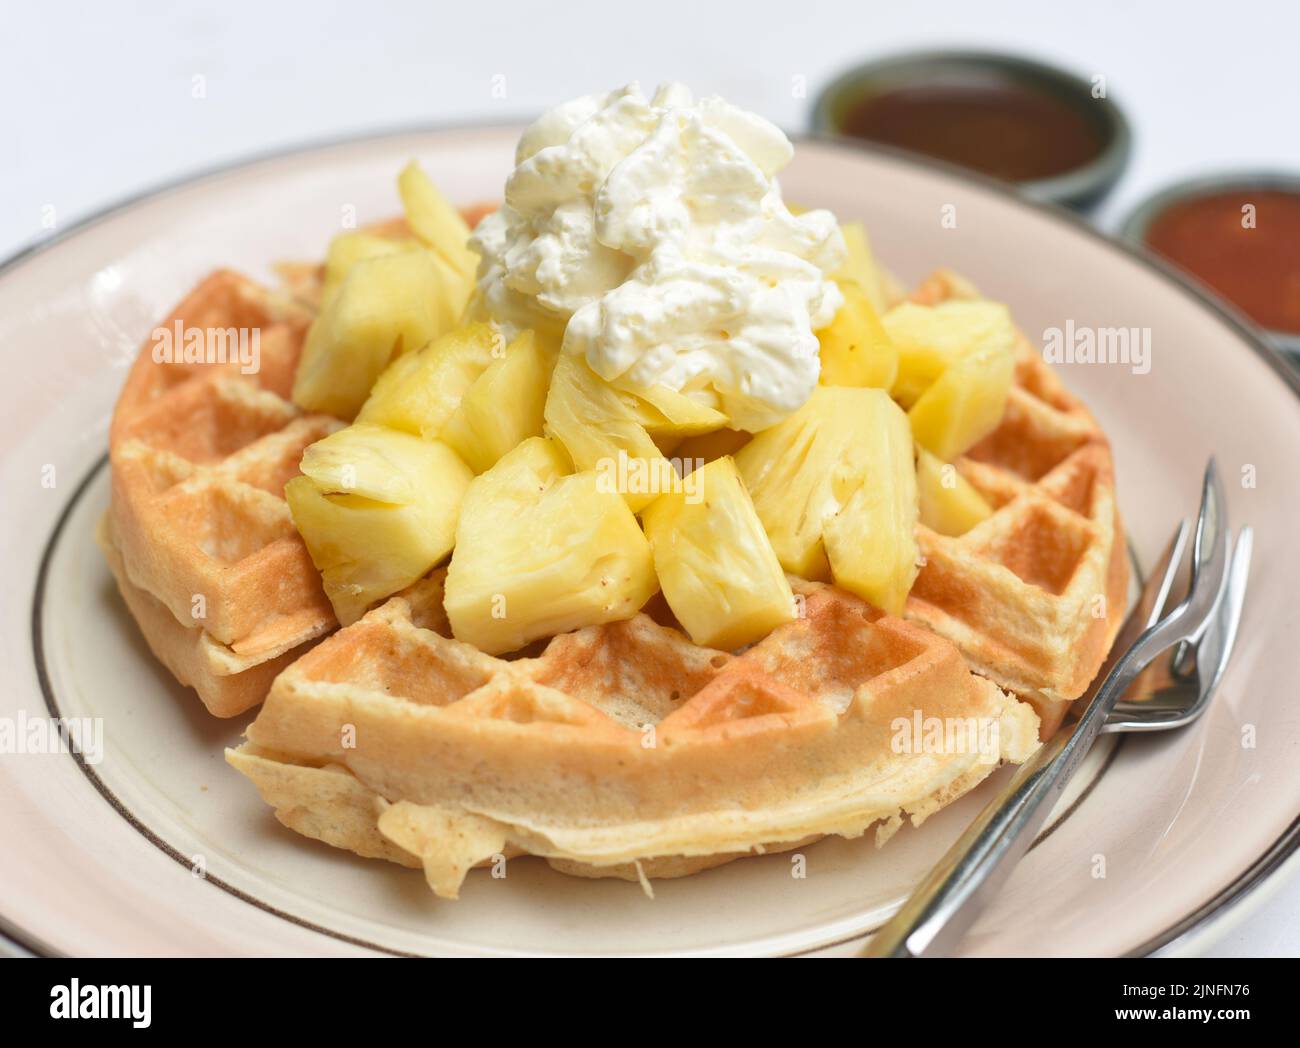 Belgium waffles with pineapple and ice ream on a plate Stock Photo